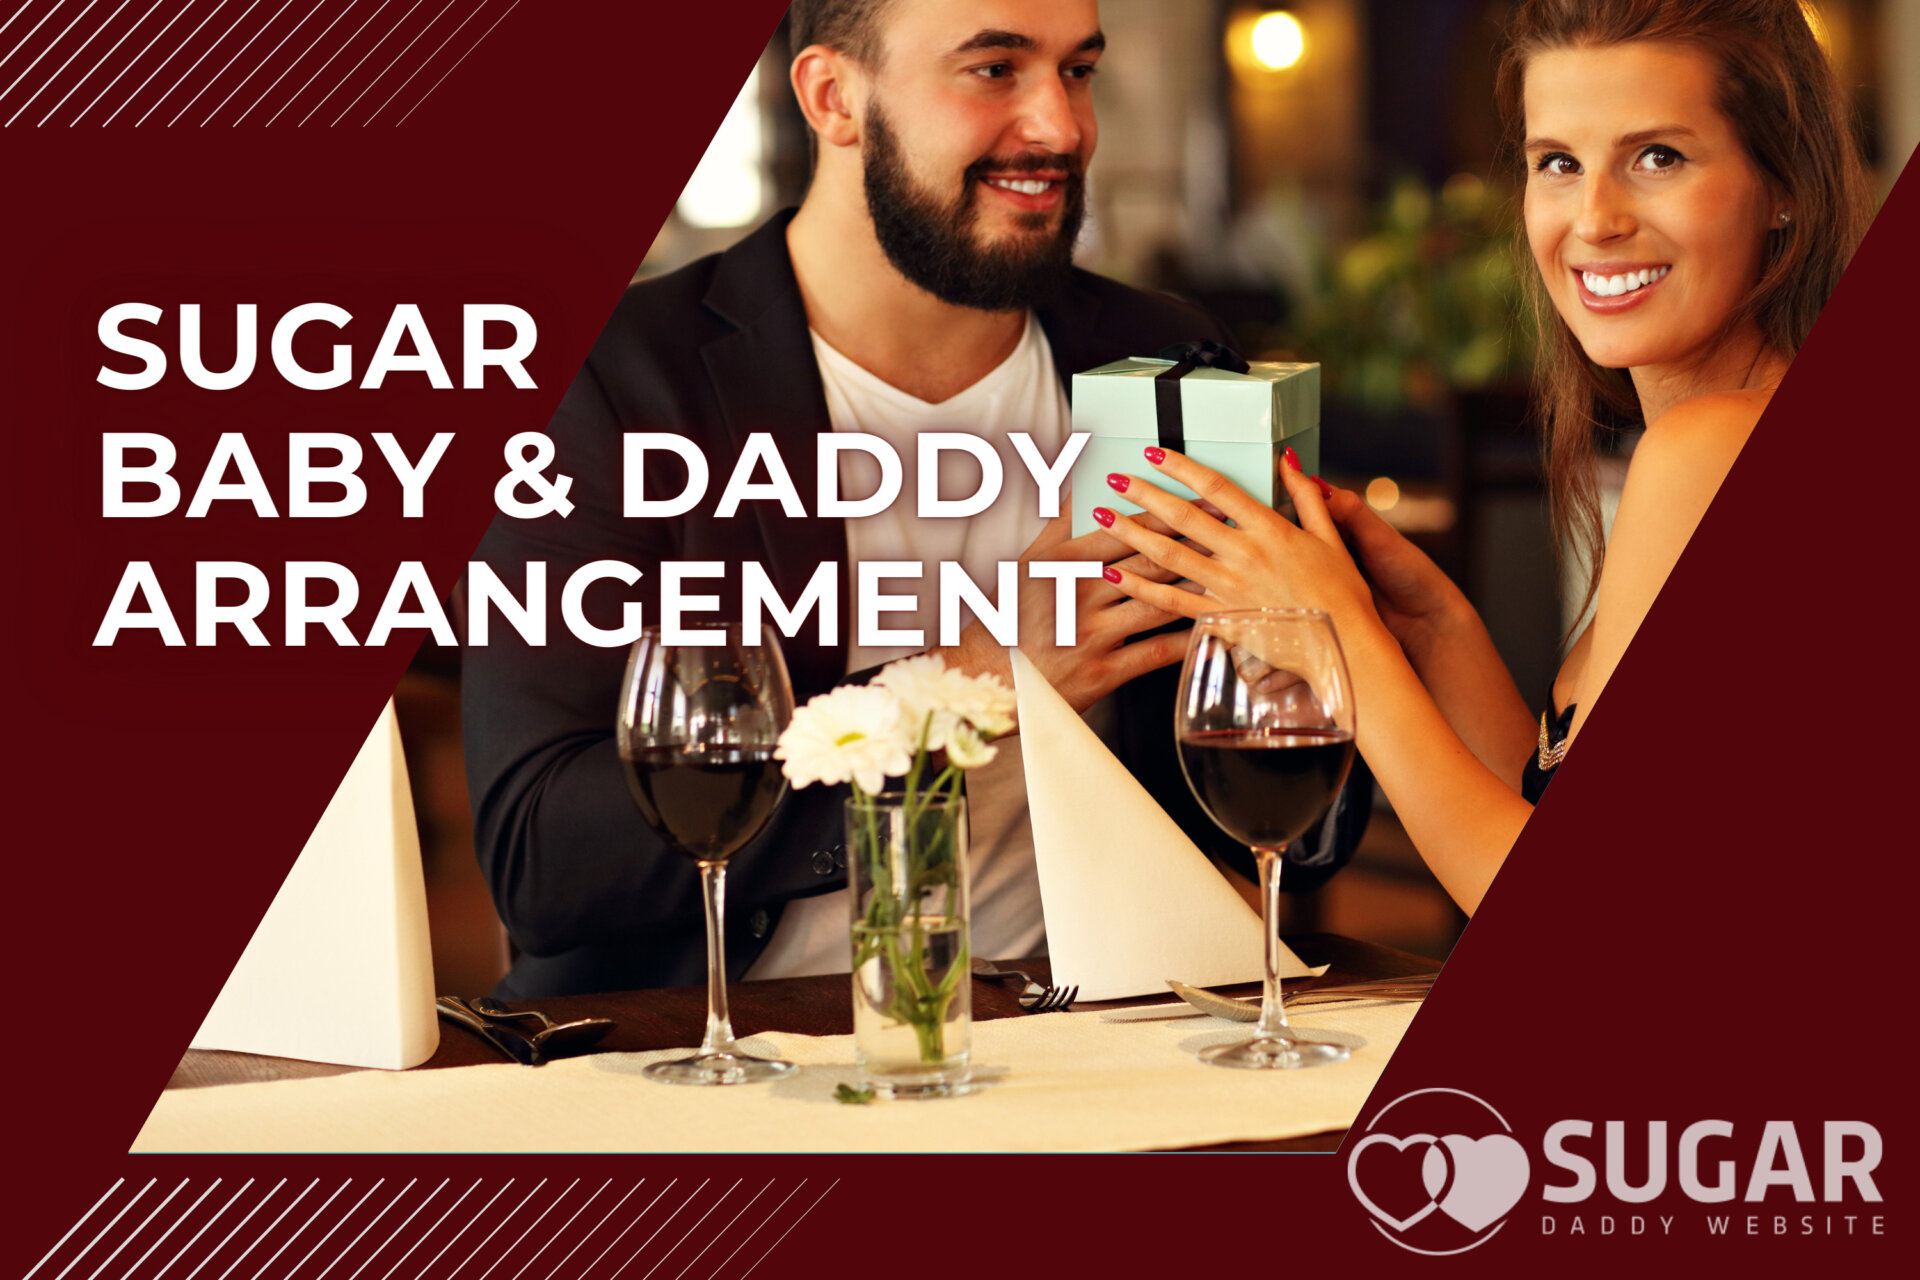 Sugar Baby & Daddy Arrangement Examples: How Mutual Agreement Works?